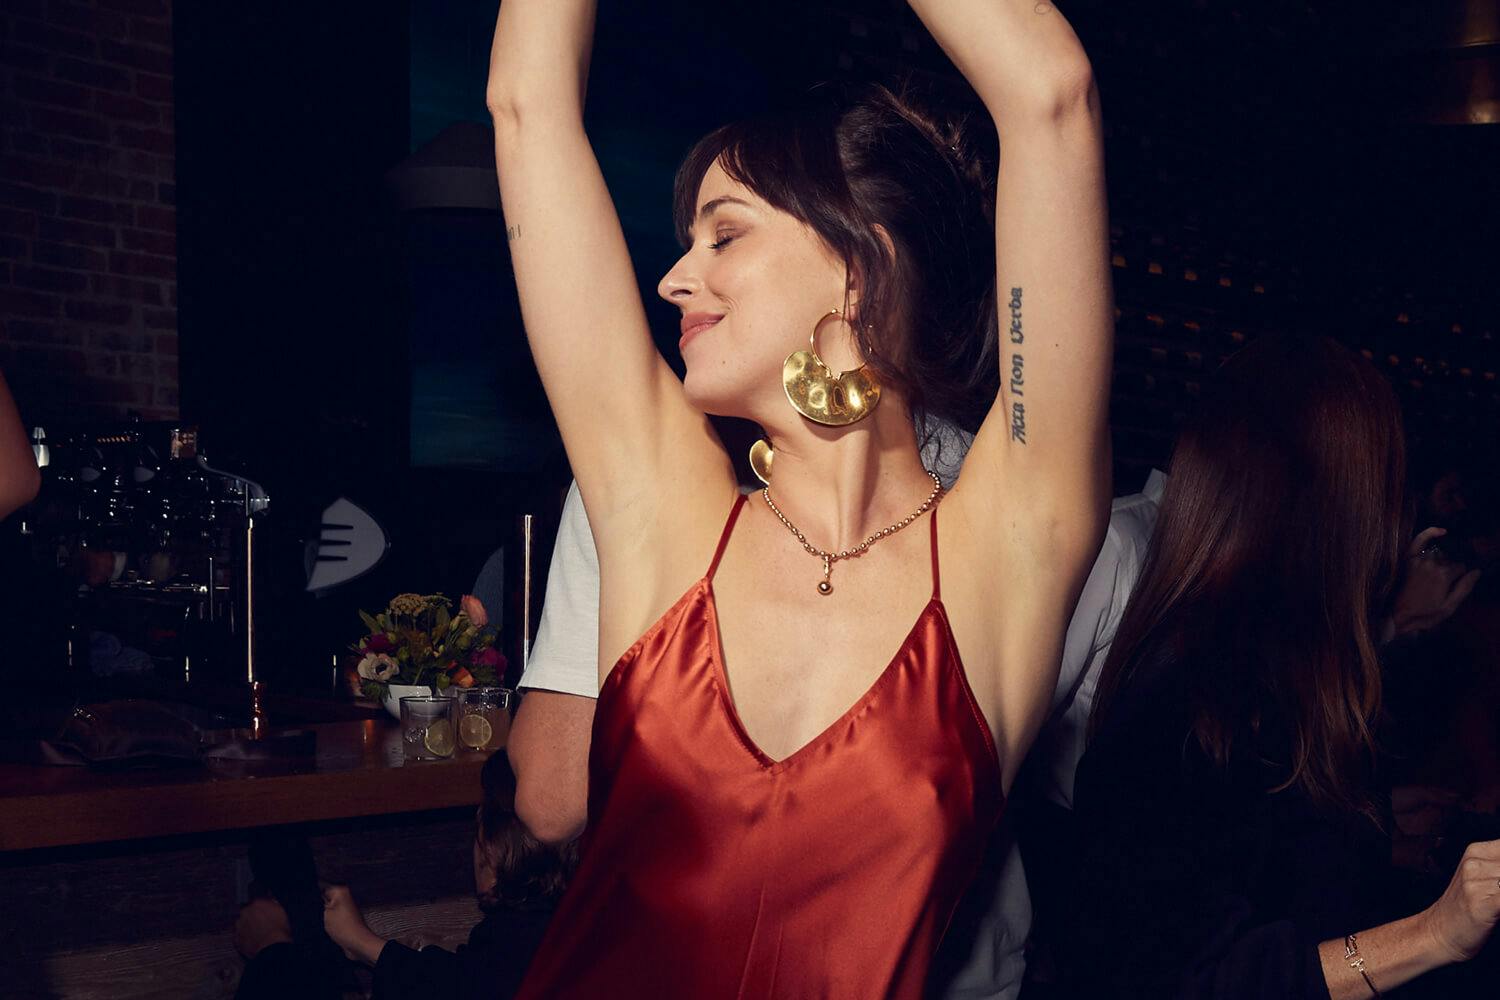 Dakota Johnson dancing with her hands in the air while wearing a red silk slip dress at the Telluride Film Festival, 2021.